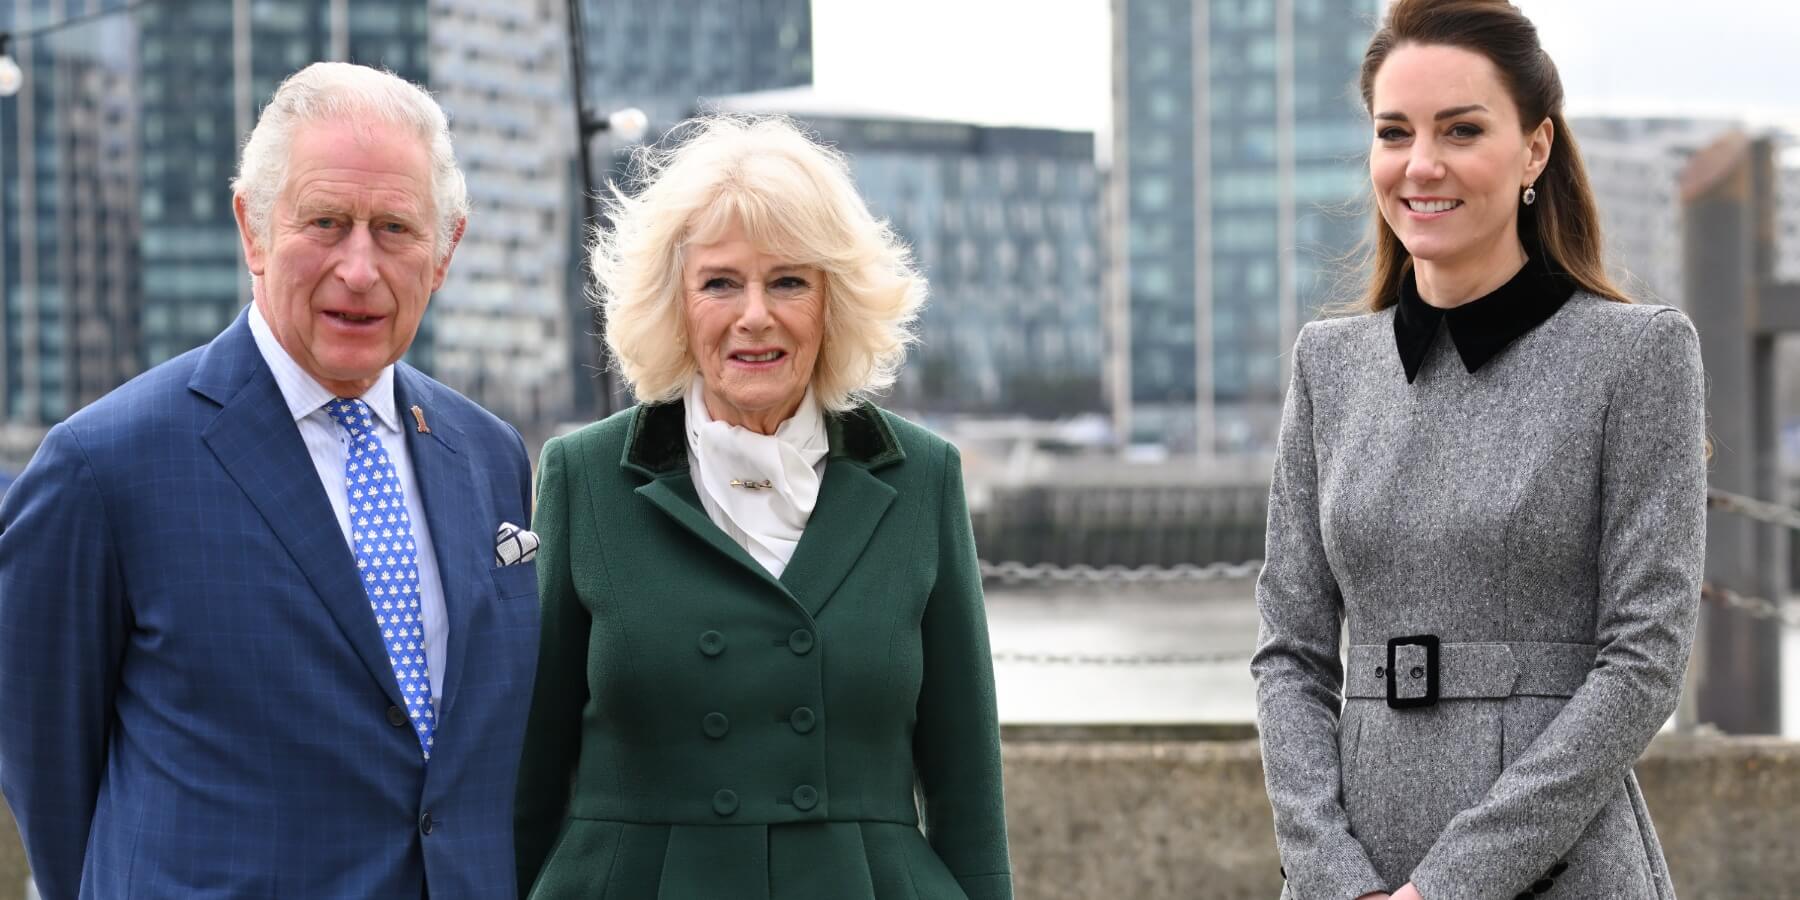 King Charles and Camilla Parker Bowles pose with Kate Middleton at Trinity Buoy Wharf on February 03, 2022.